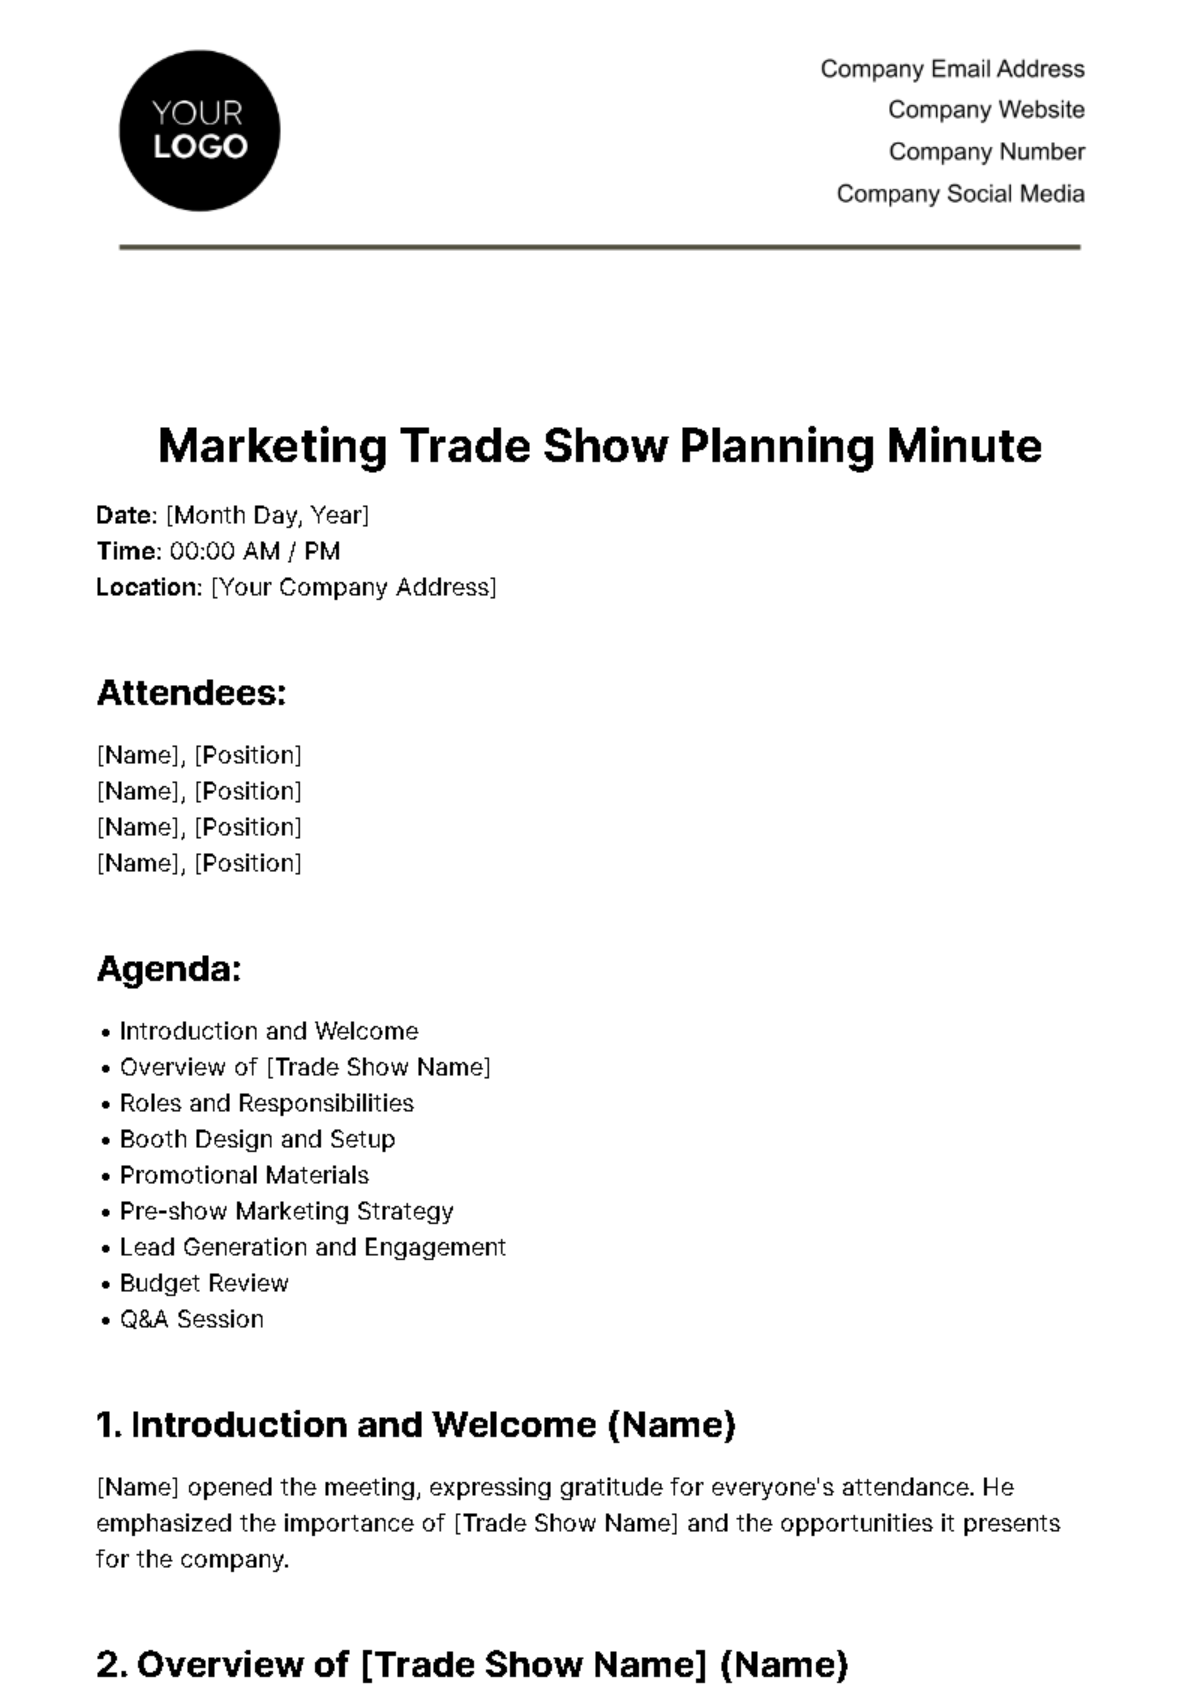 Free Marketing Trade Show Planning Minute Template